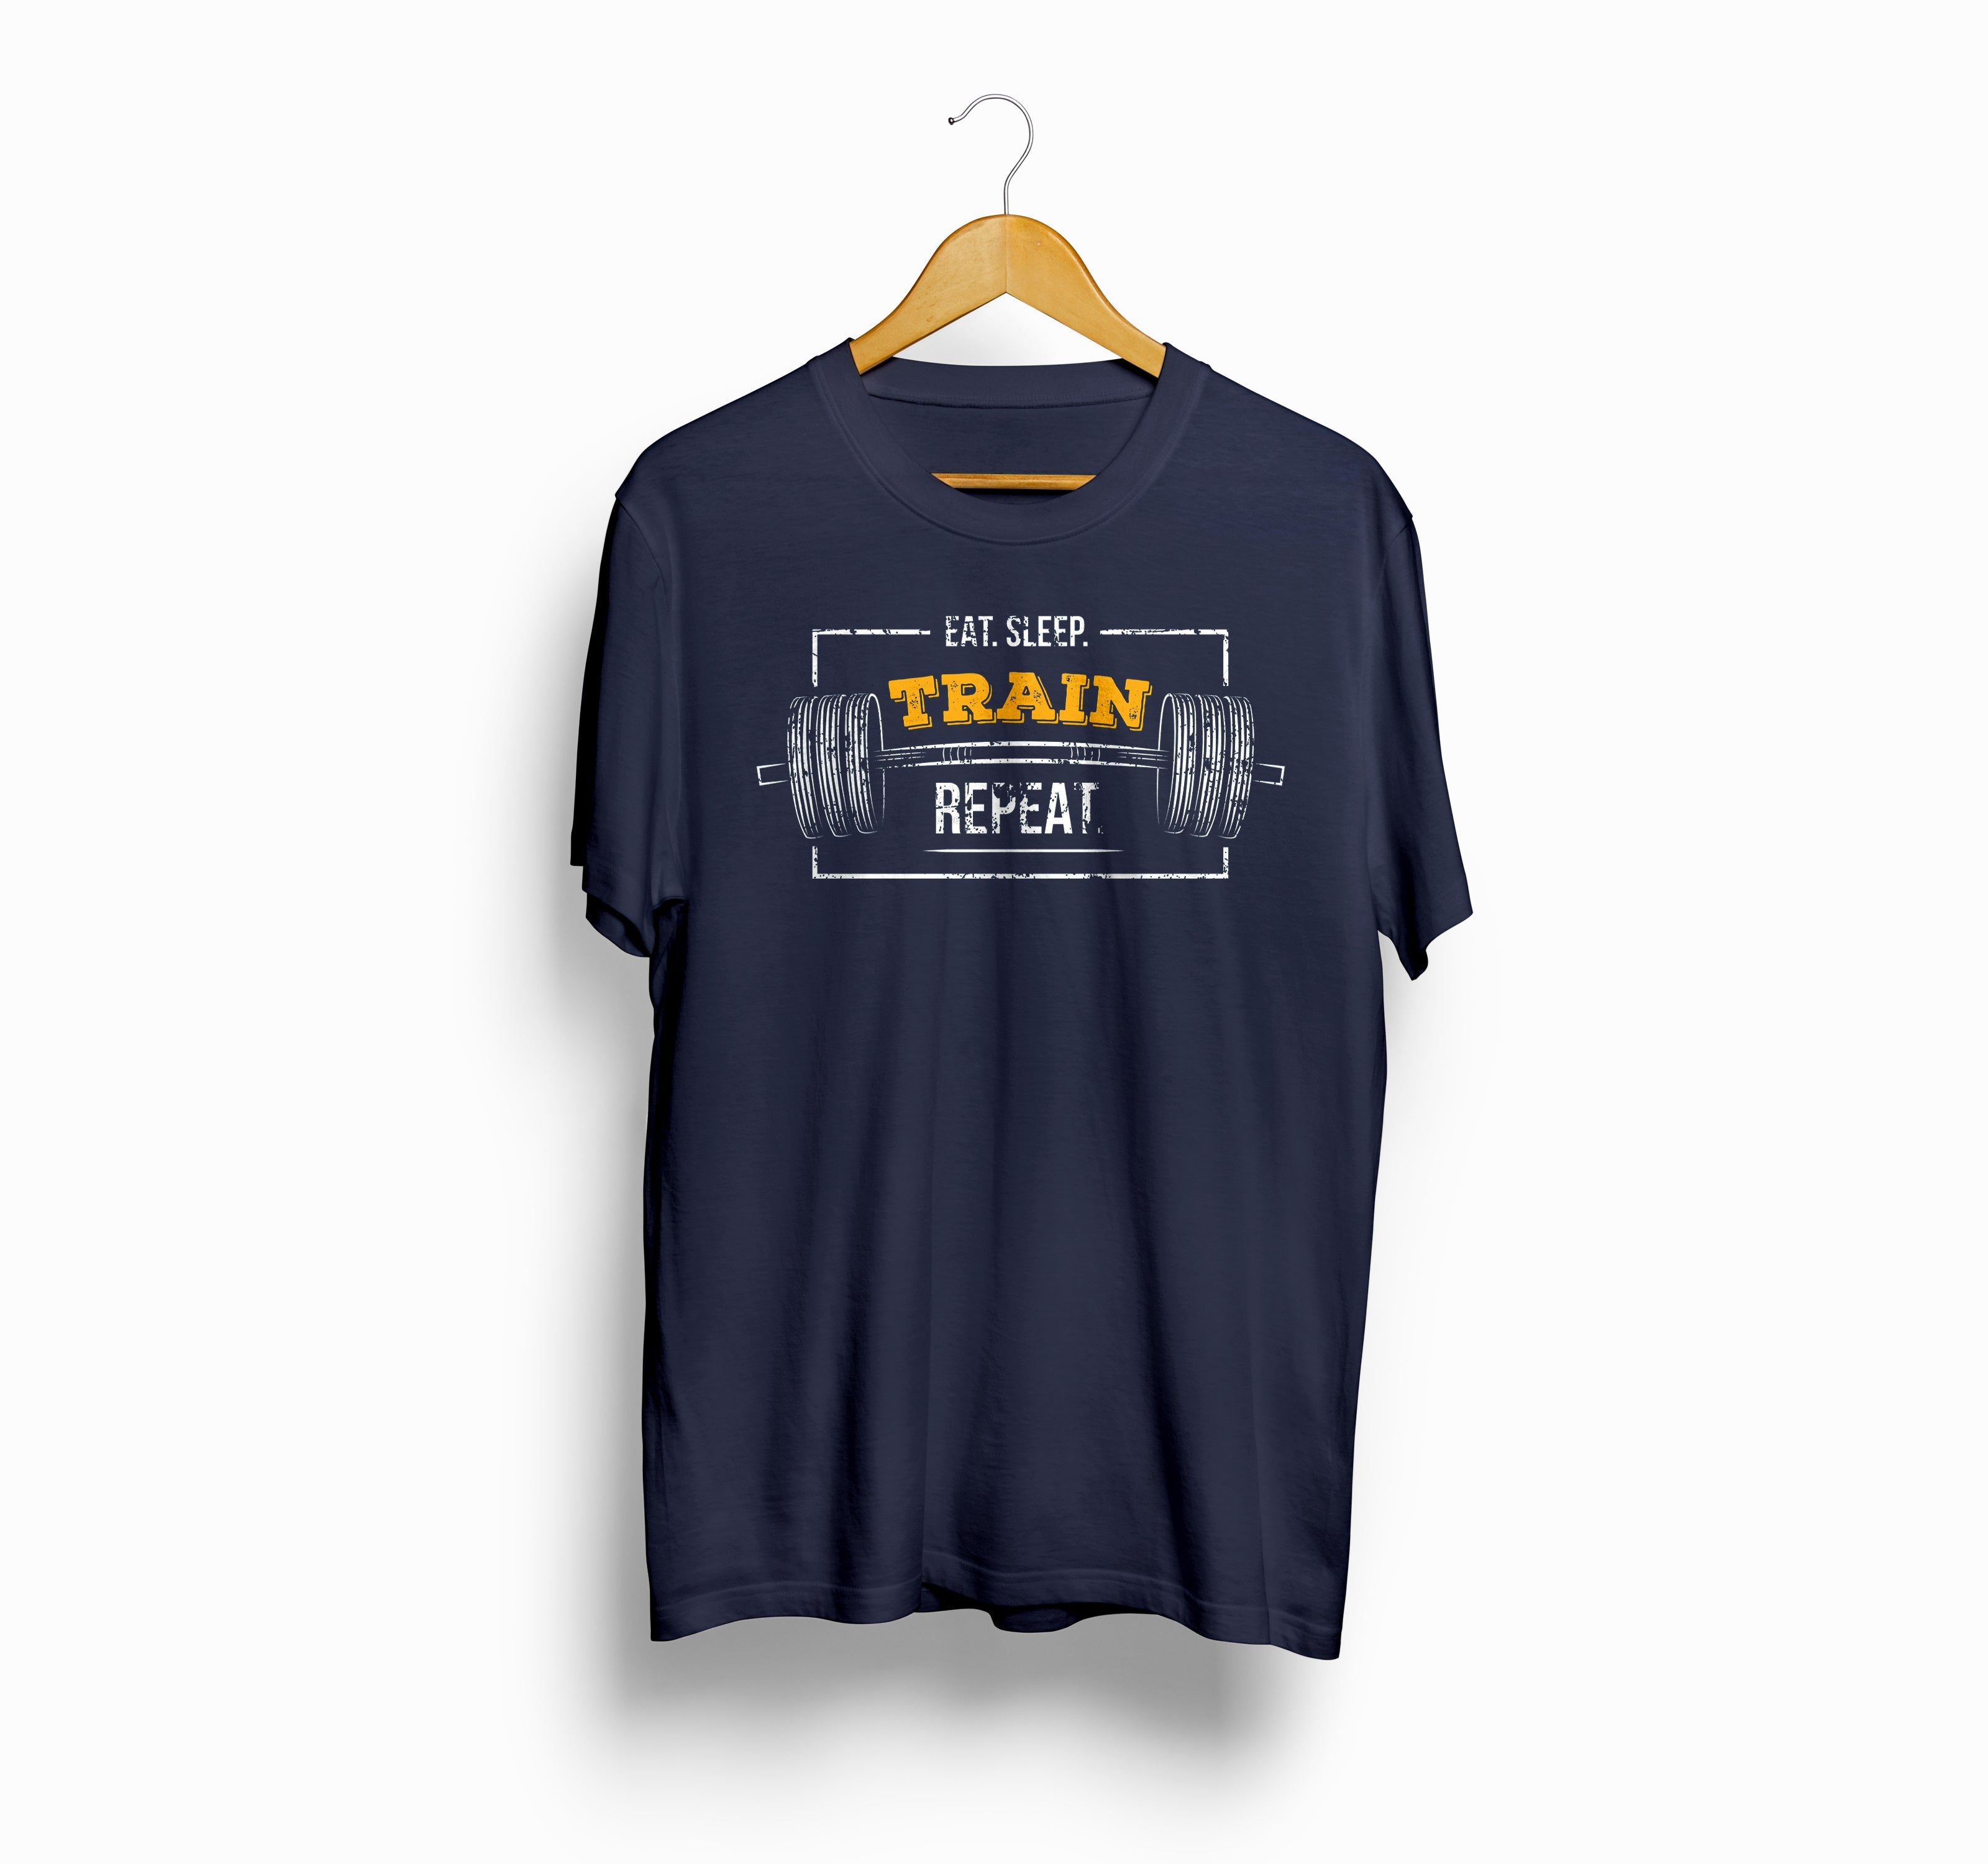 Bizzar's Eat, Sleep, Train and Repeat Navy Blue T-Shirt